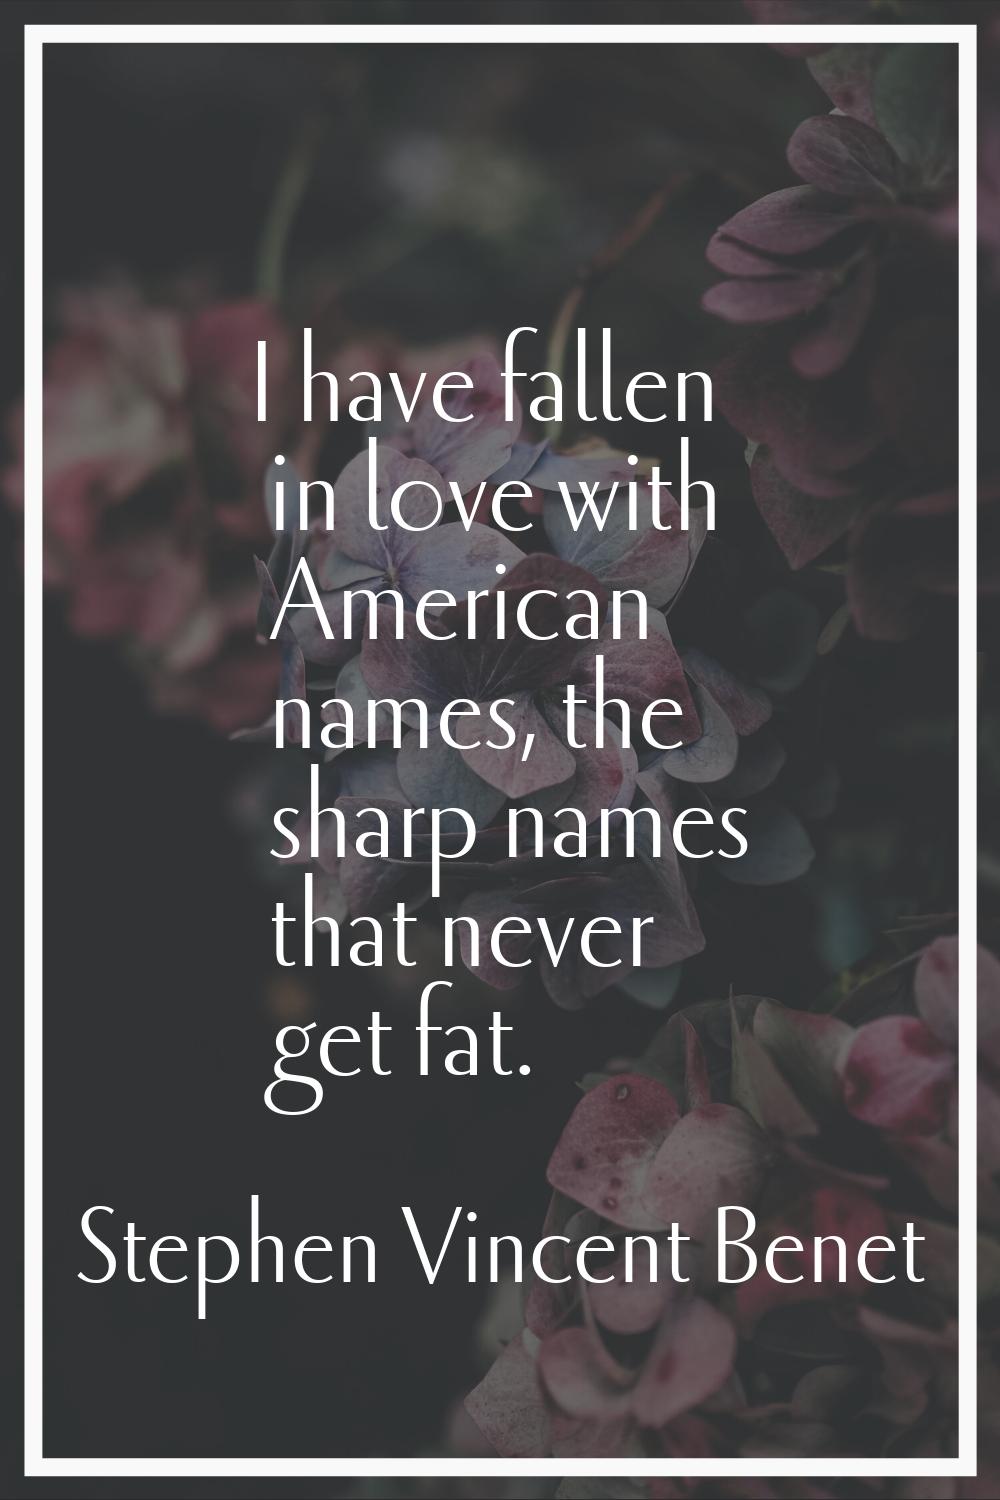 I have fallen in love with American names, the sharp names that never get fat.